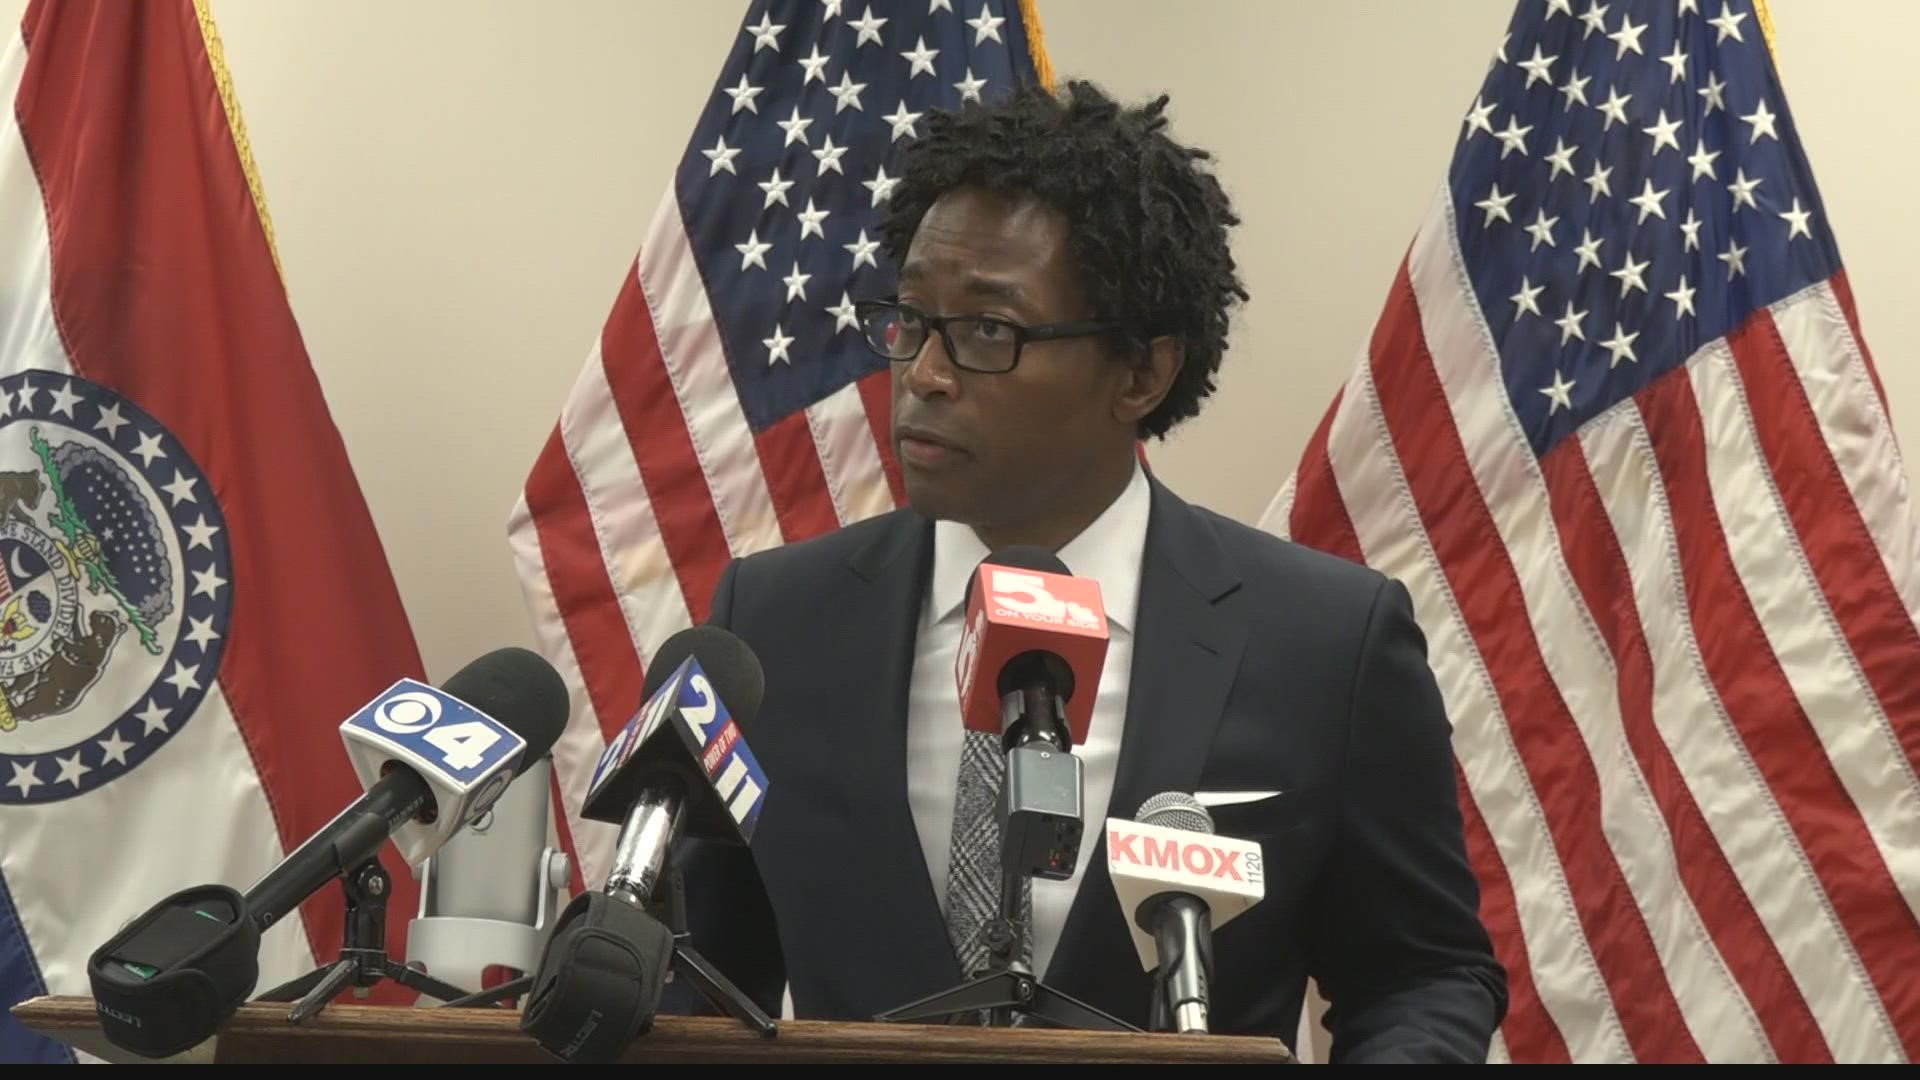 St. Louis County Prosecuting Attorney Wesley Bell is making his point clear. He said he will not prosecute abortion cases.